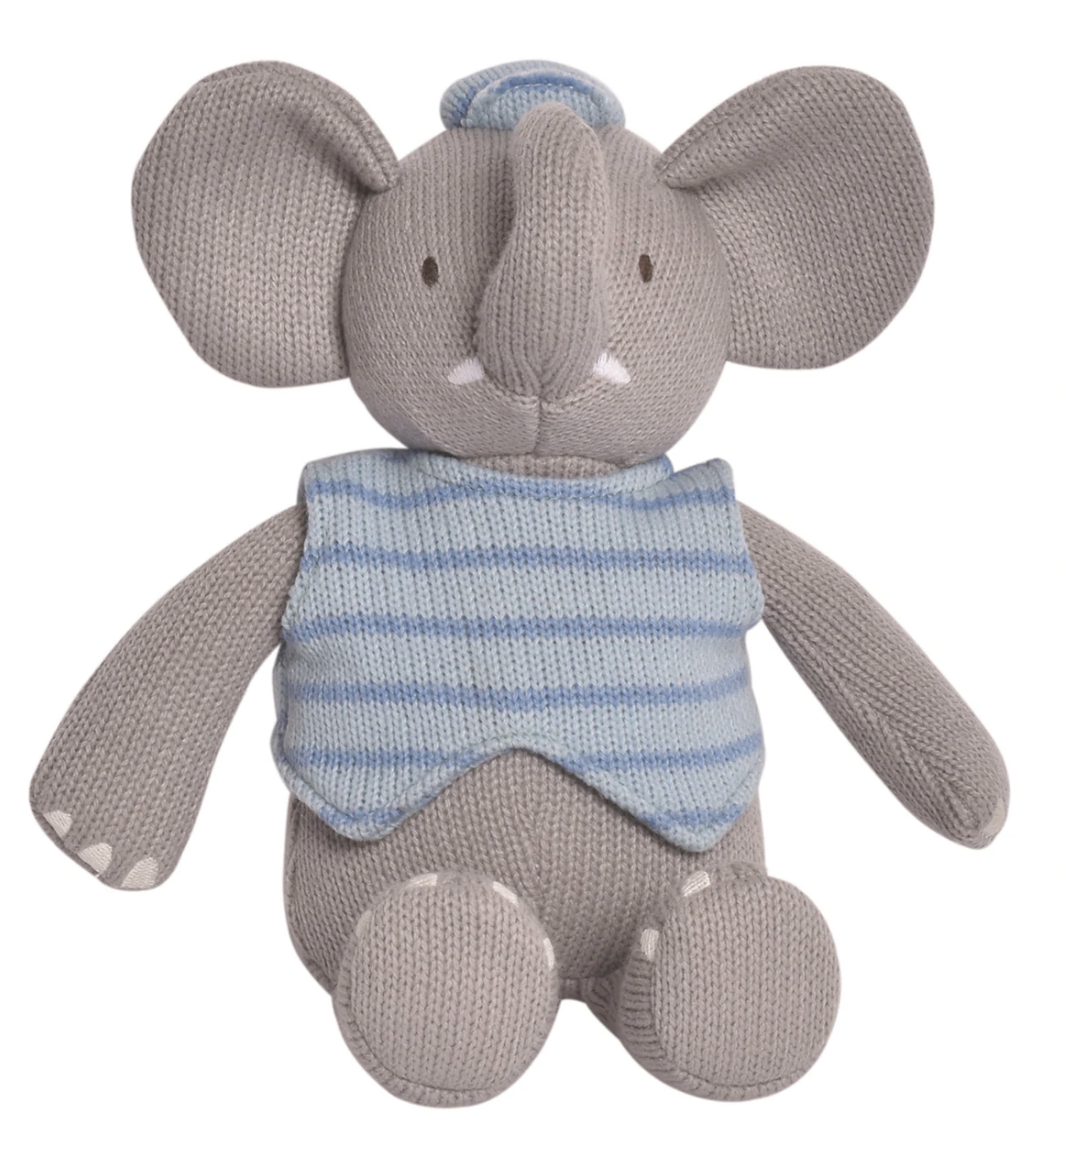 Alvin the Elephant Knitted Plush Toy